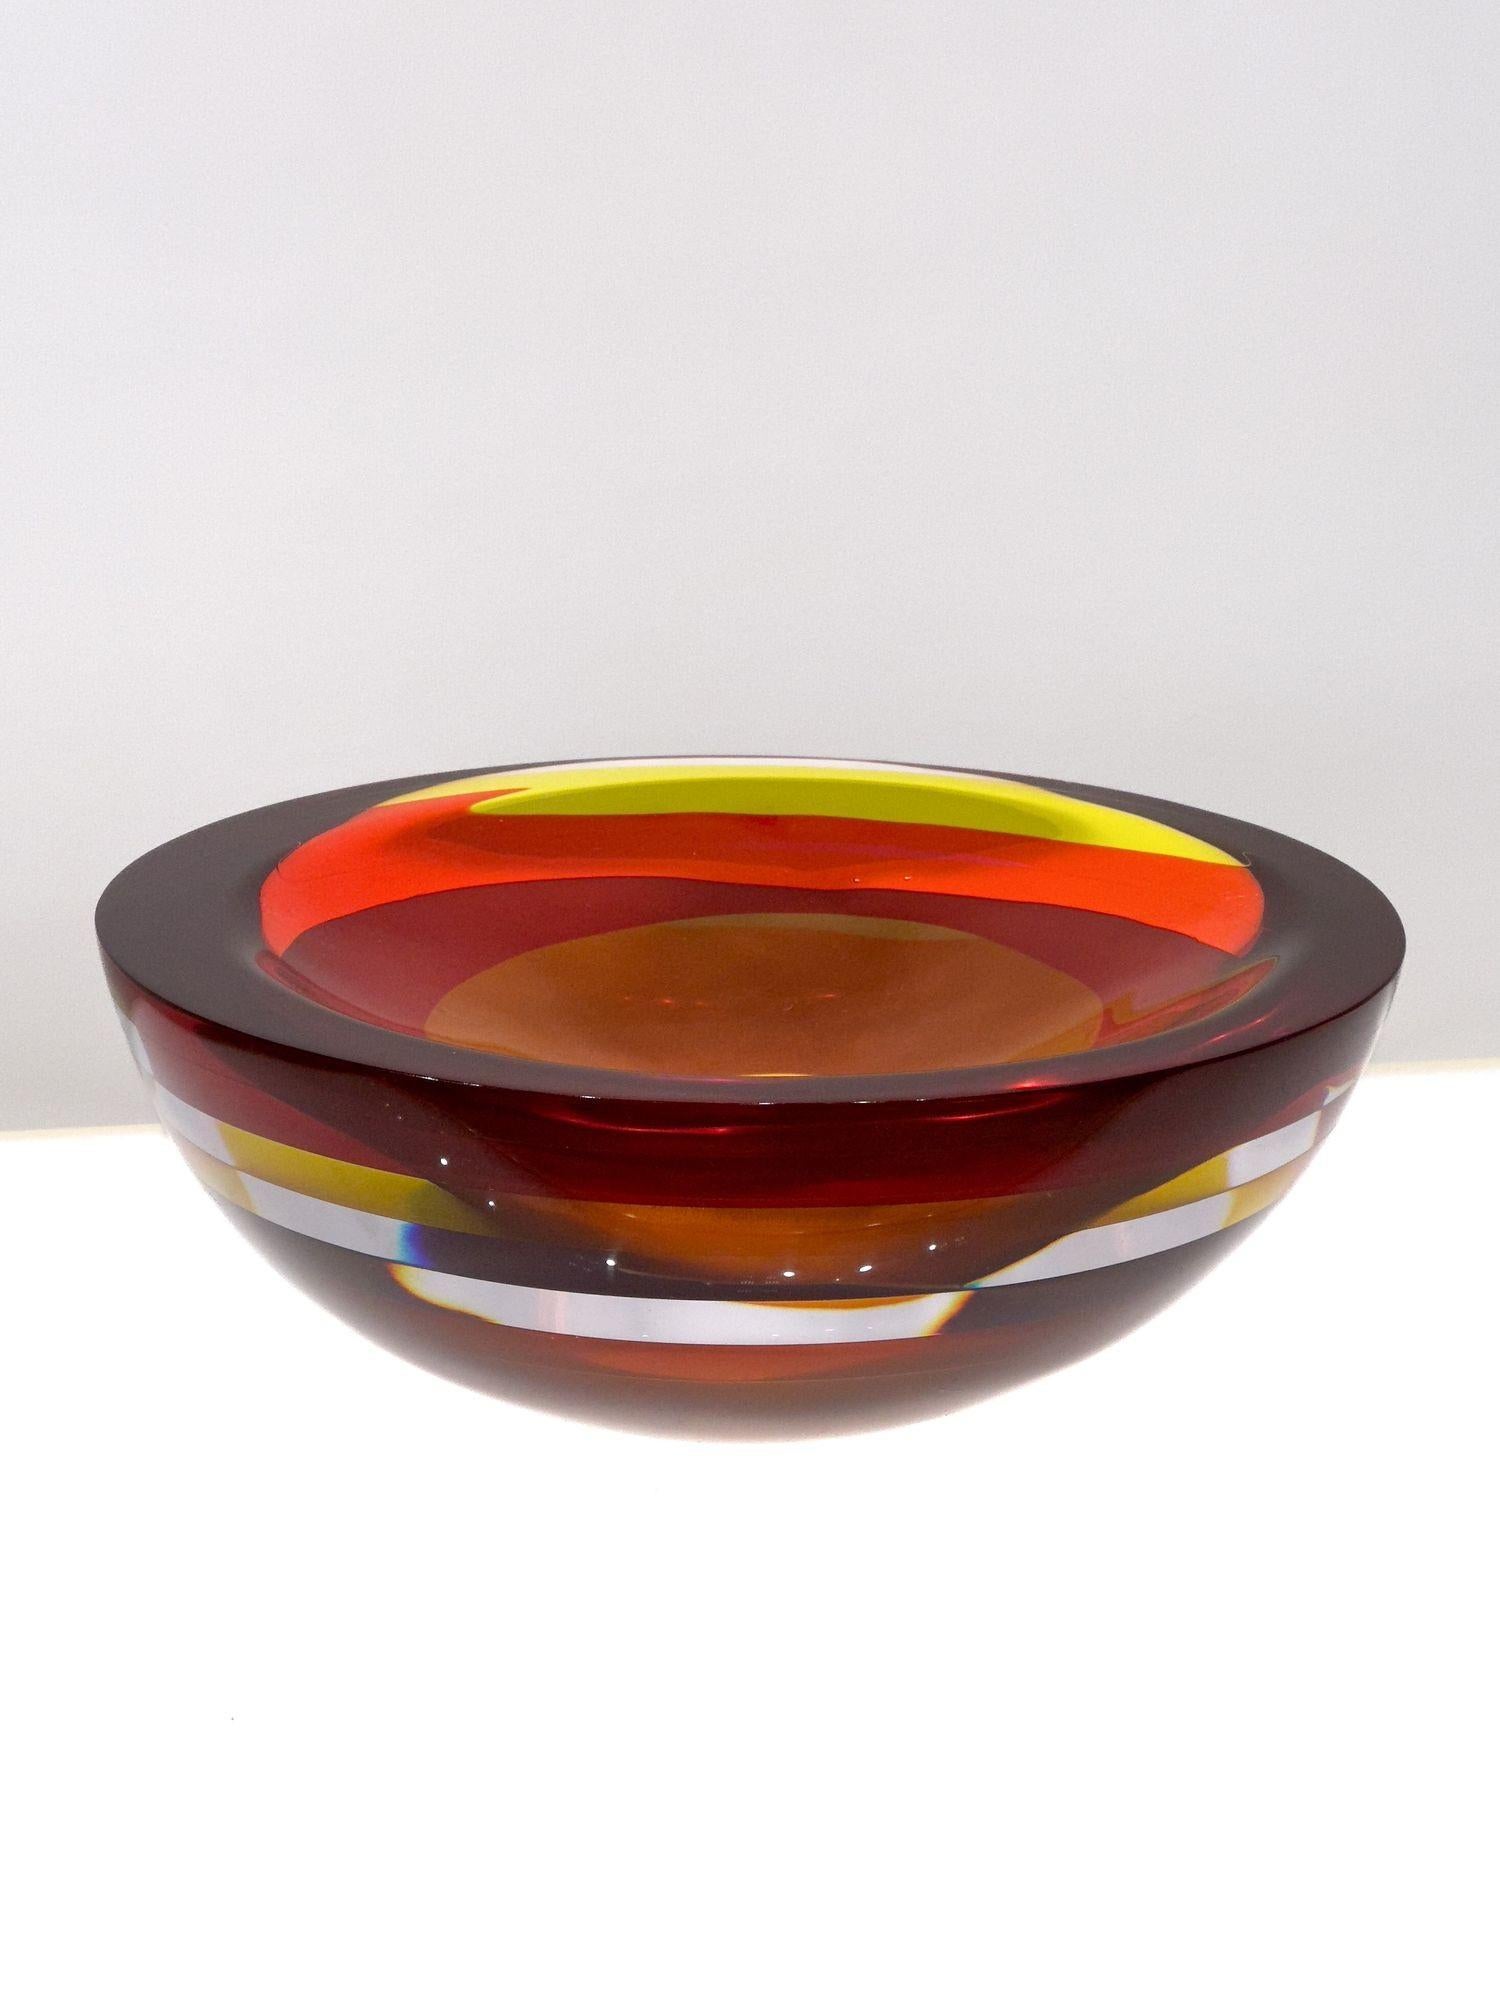 Optical Acrylic Red Bowl by Maya & Terry Balle, Signed Dated, 1994. Excellent condition.
Measures 12.25